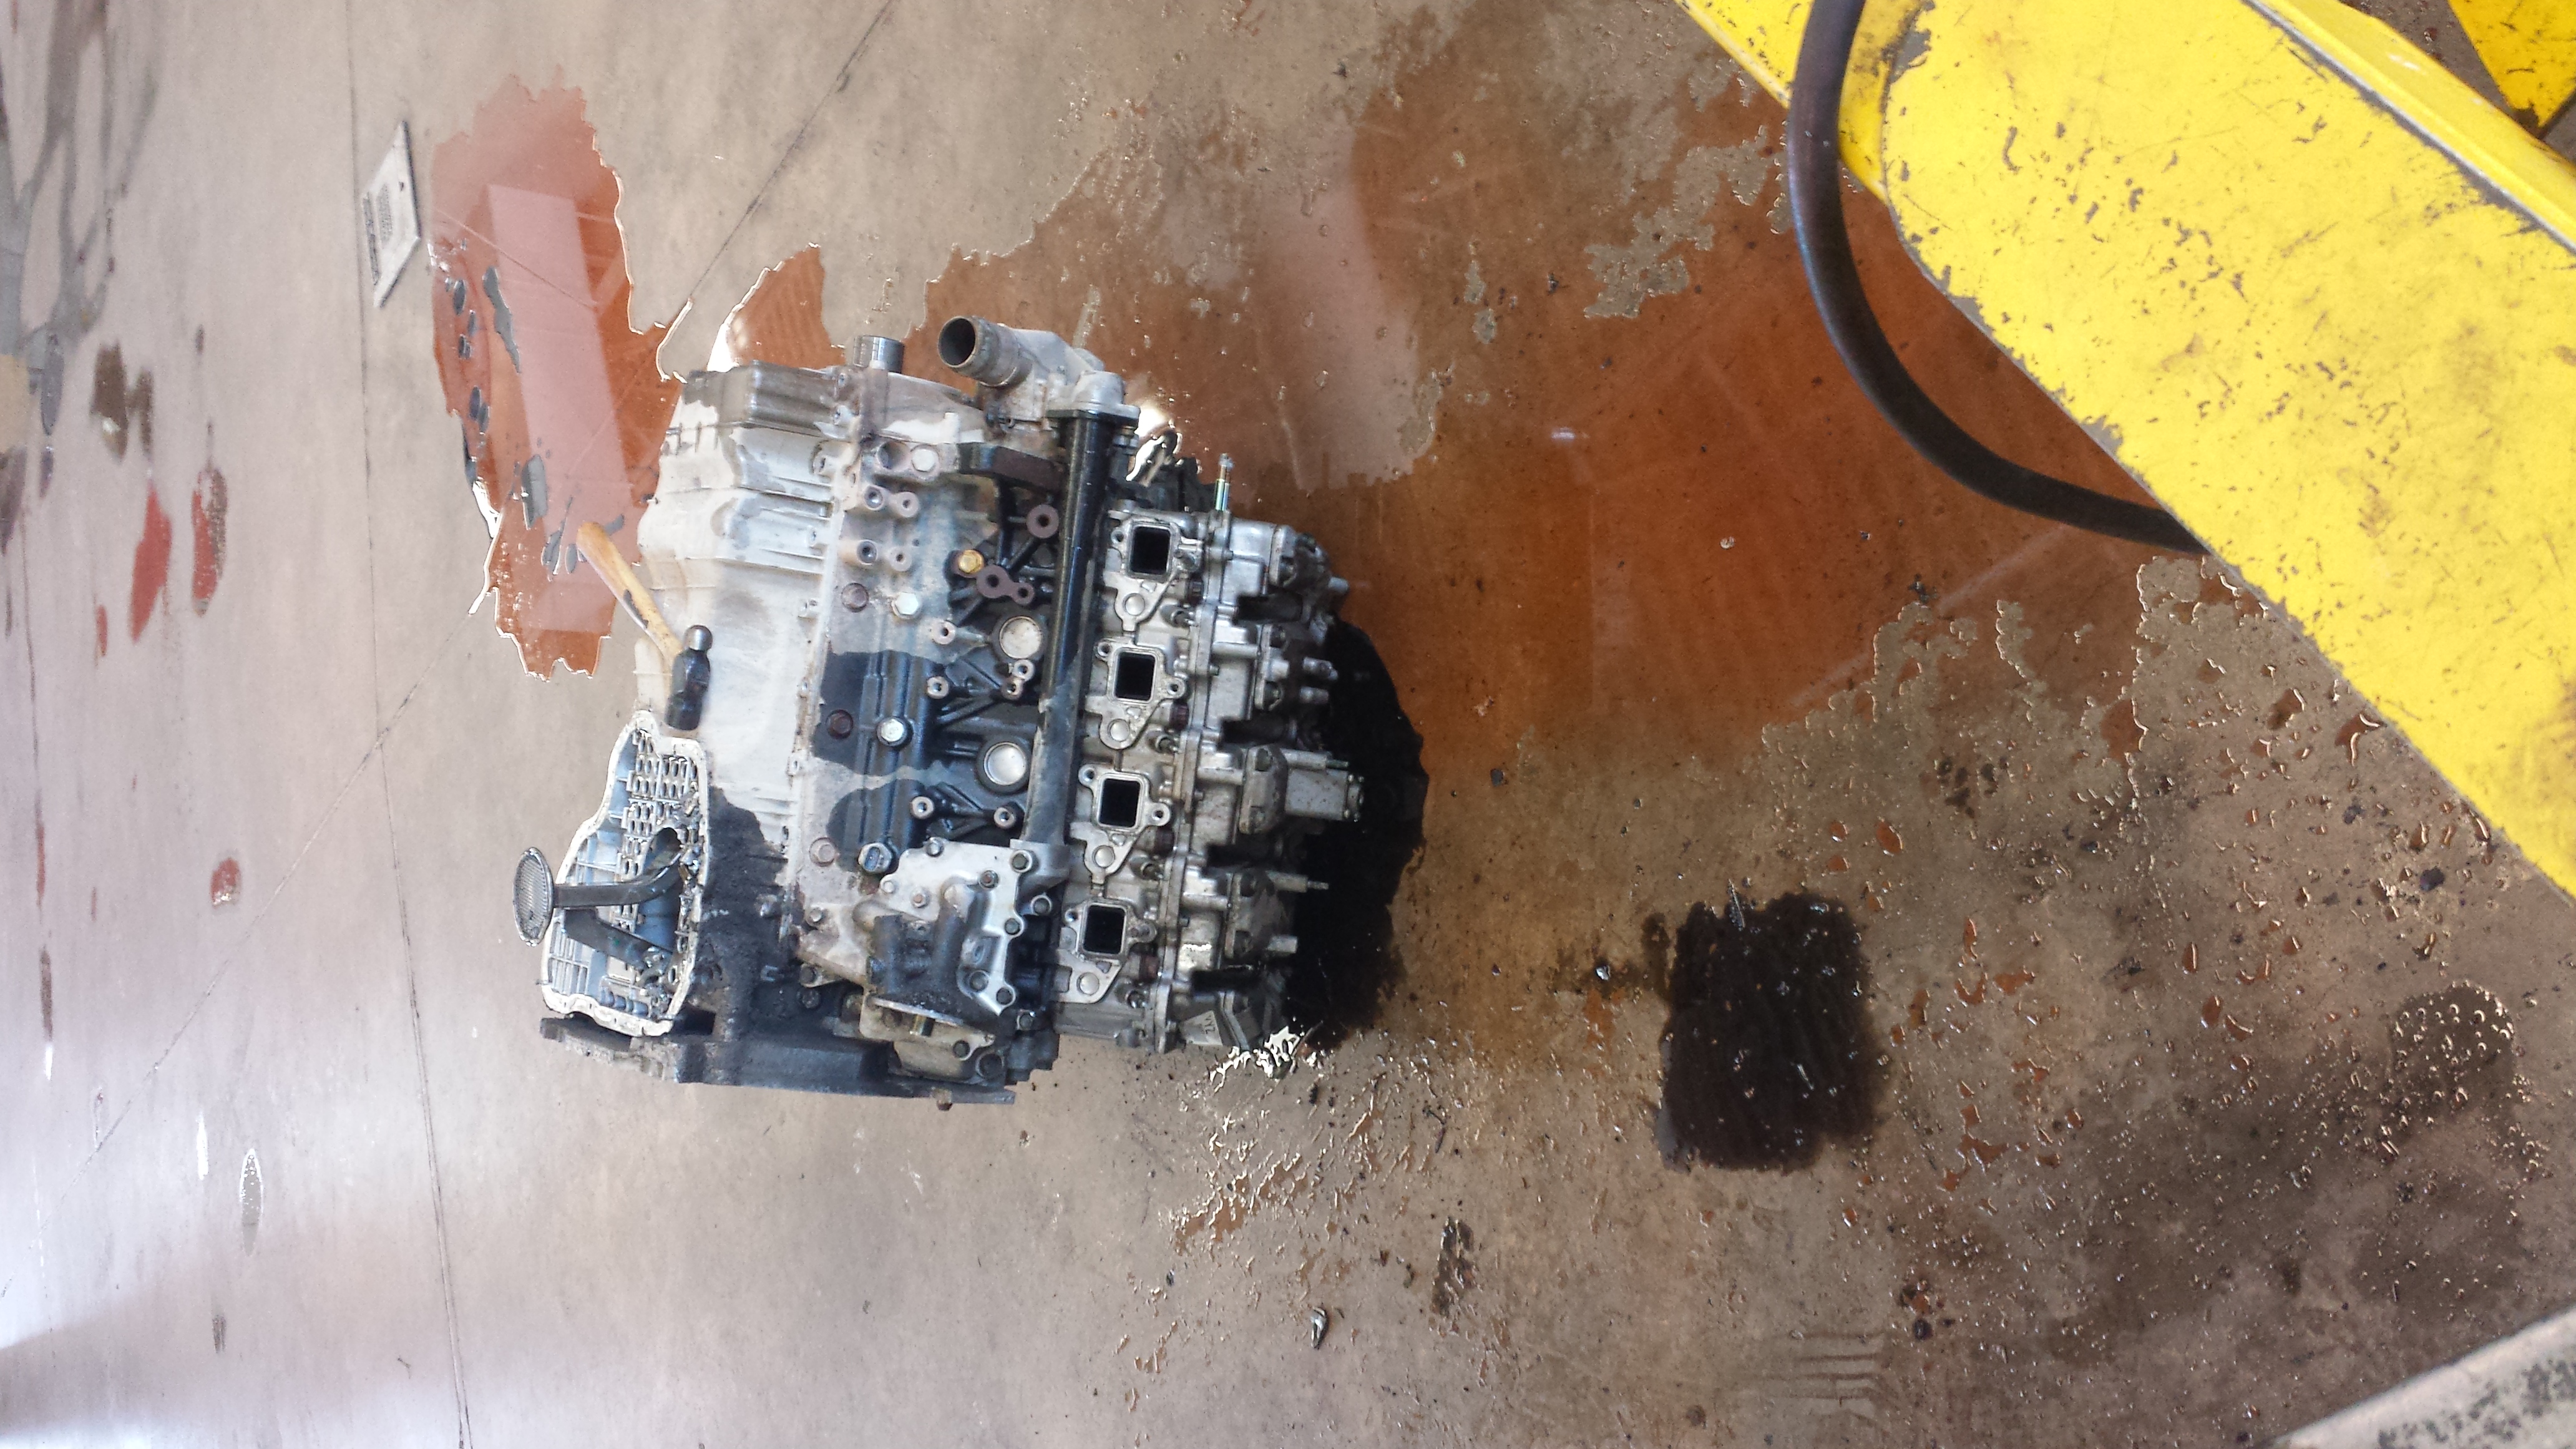 My engine on the floor at chevy dealer.